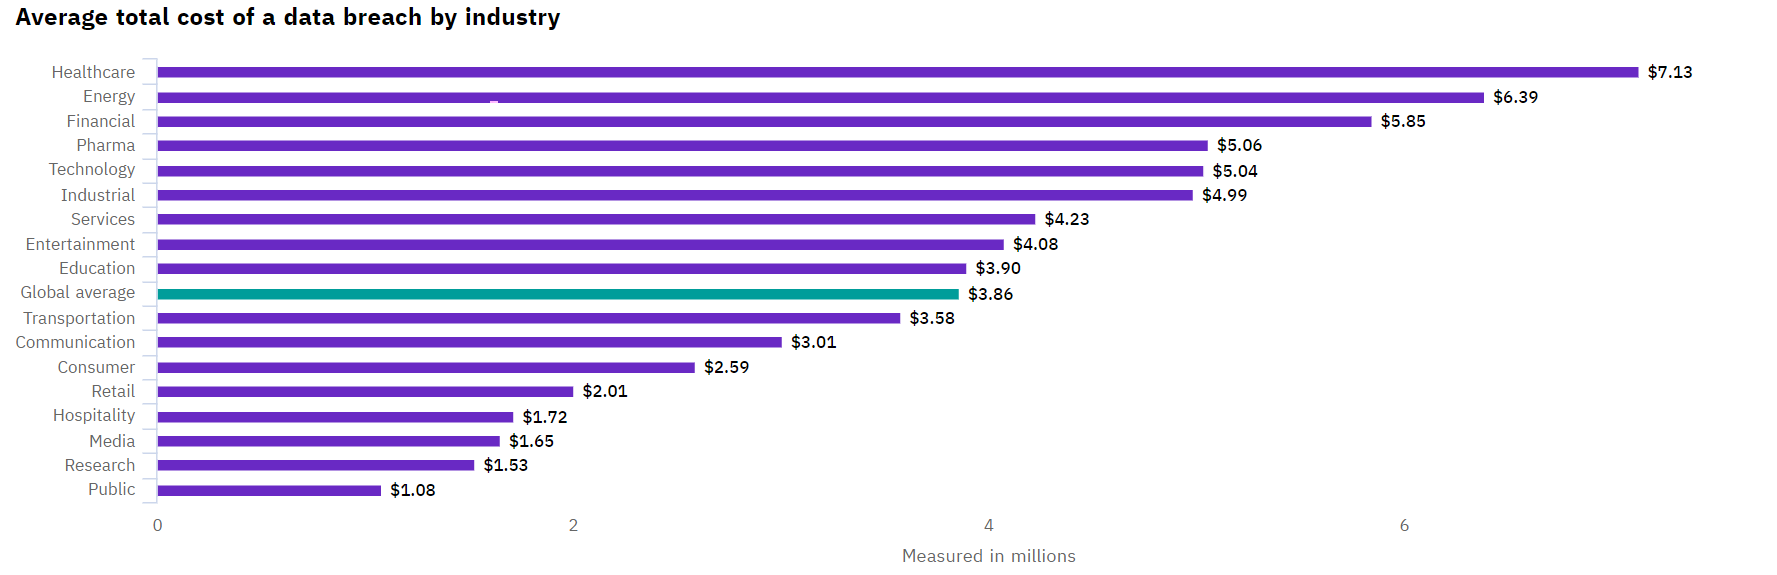 Average total cost of a data breach by industry